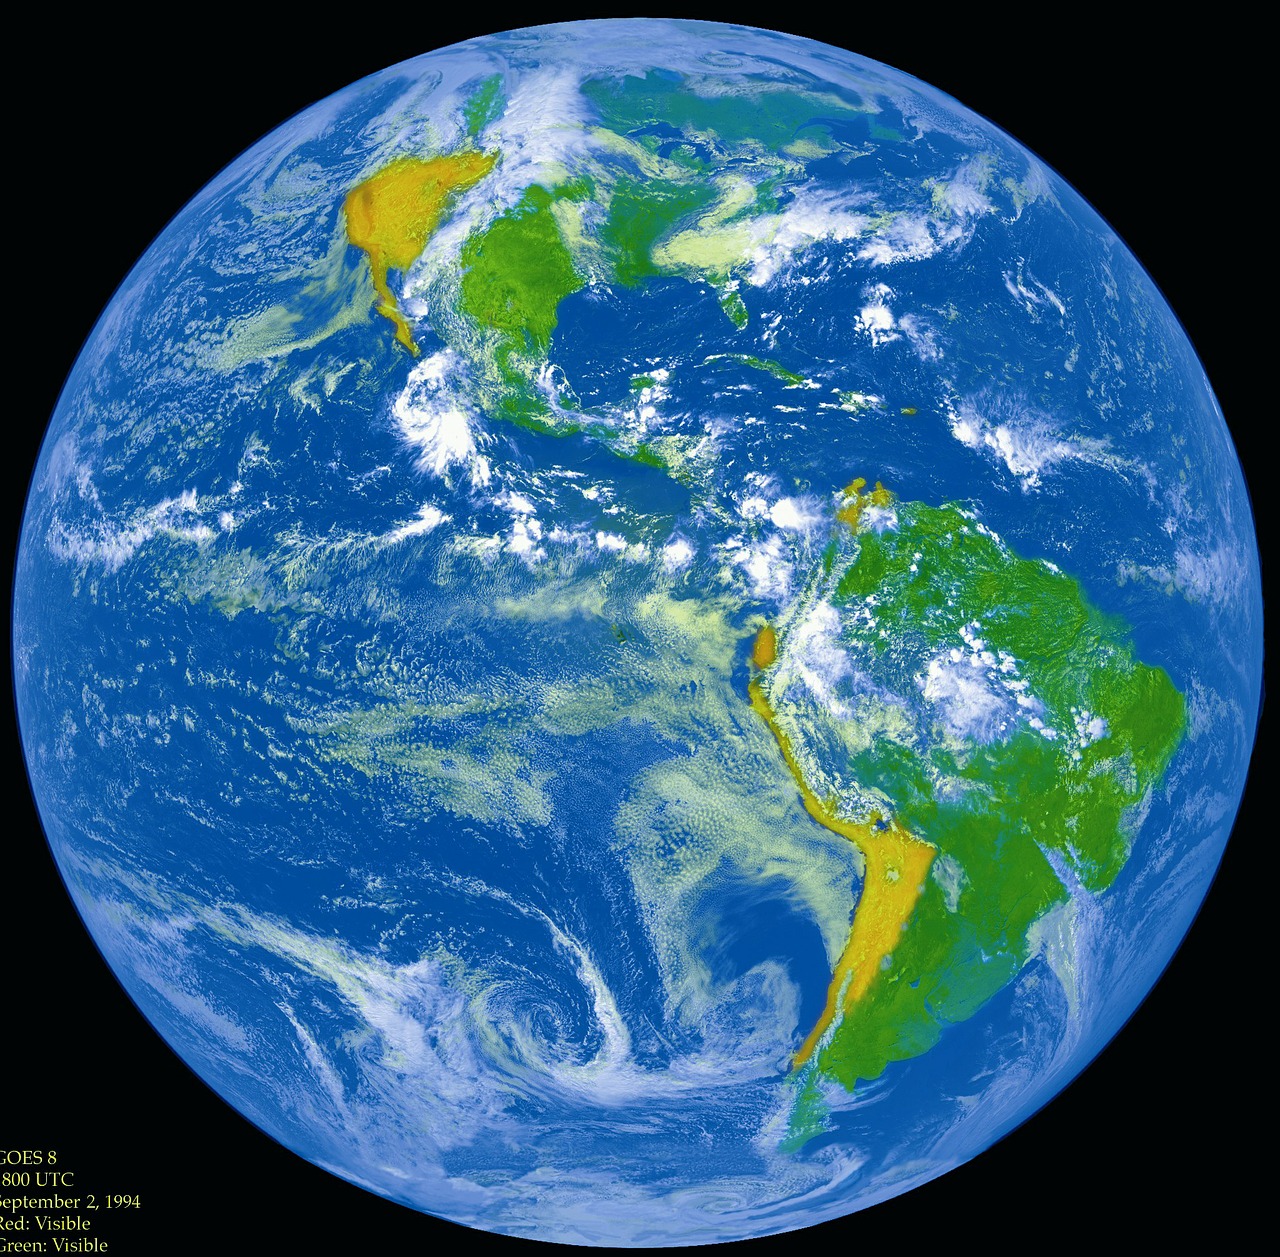 blue marble earth outer space free photo